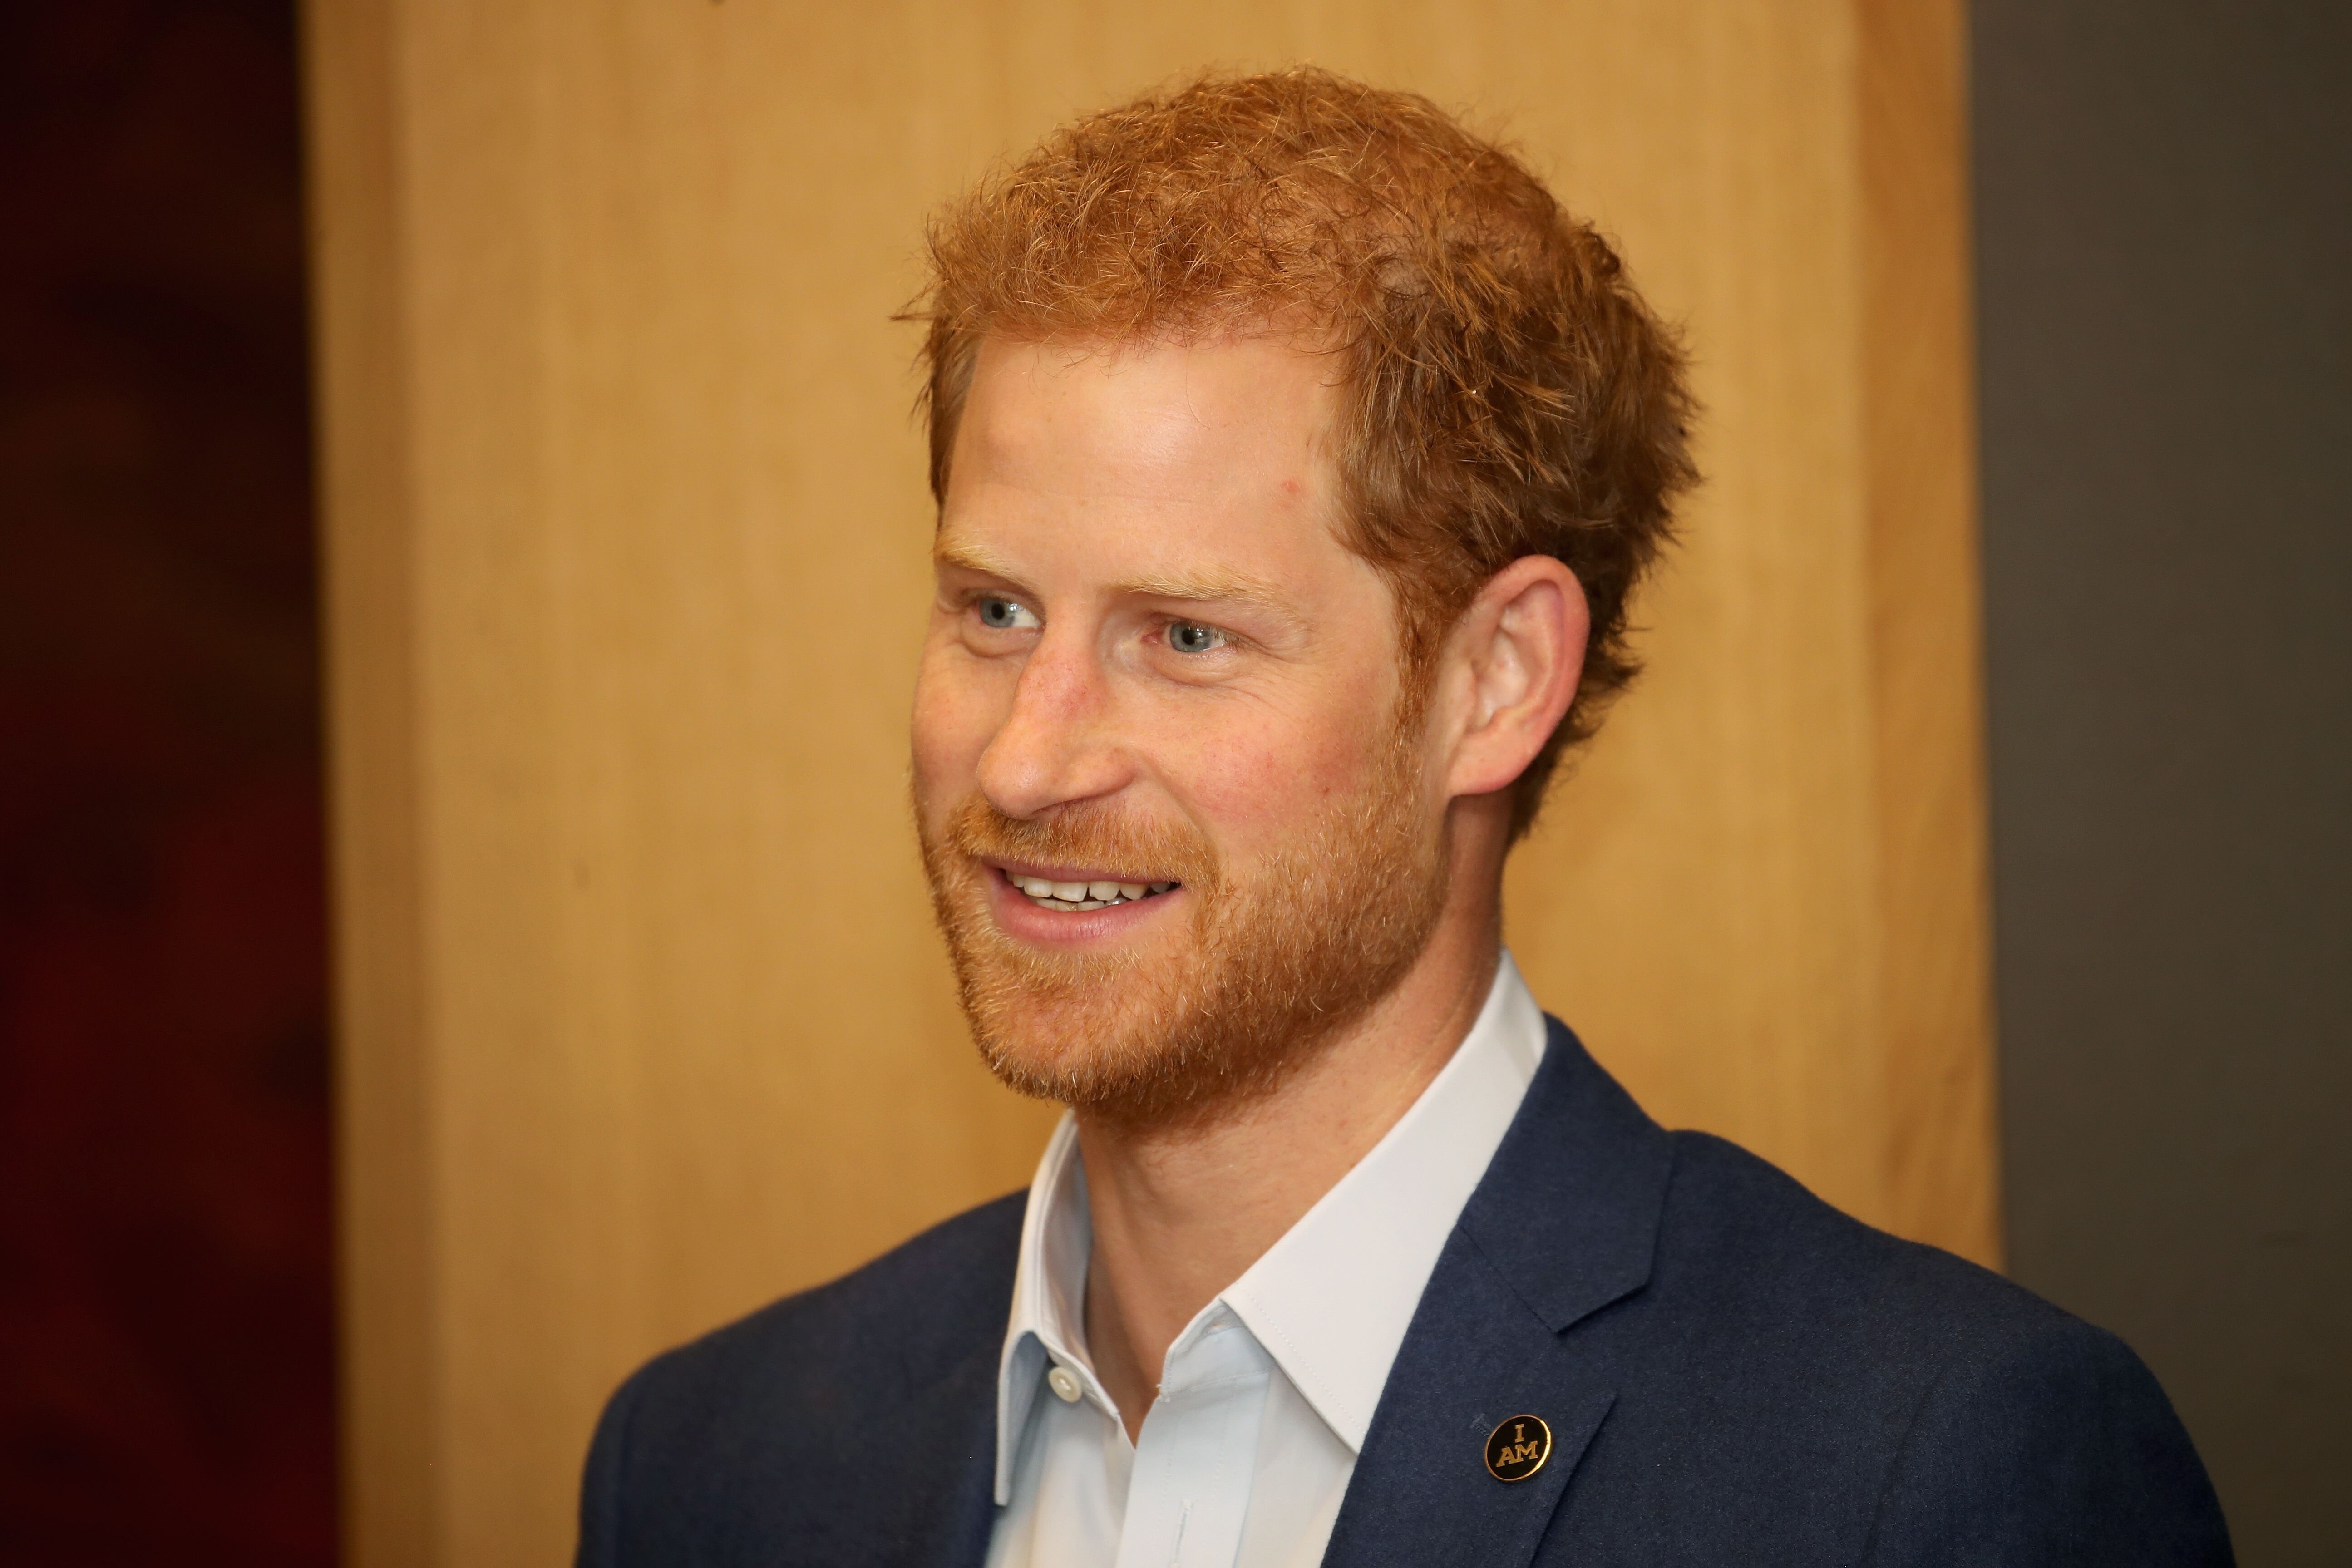 Prince Harry attends the True Patriot Love Symposium at Scotia Plaza during a pre Invictus Games event in Toronto, Canada September 22, 2017 | Photo: Getty Images